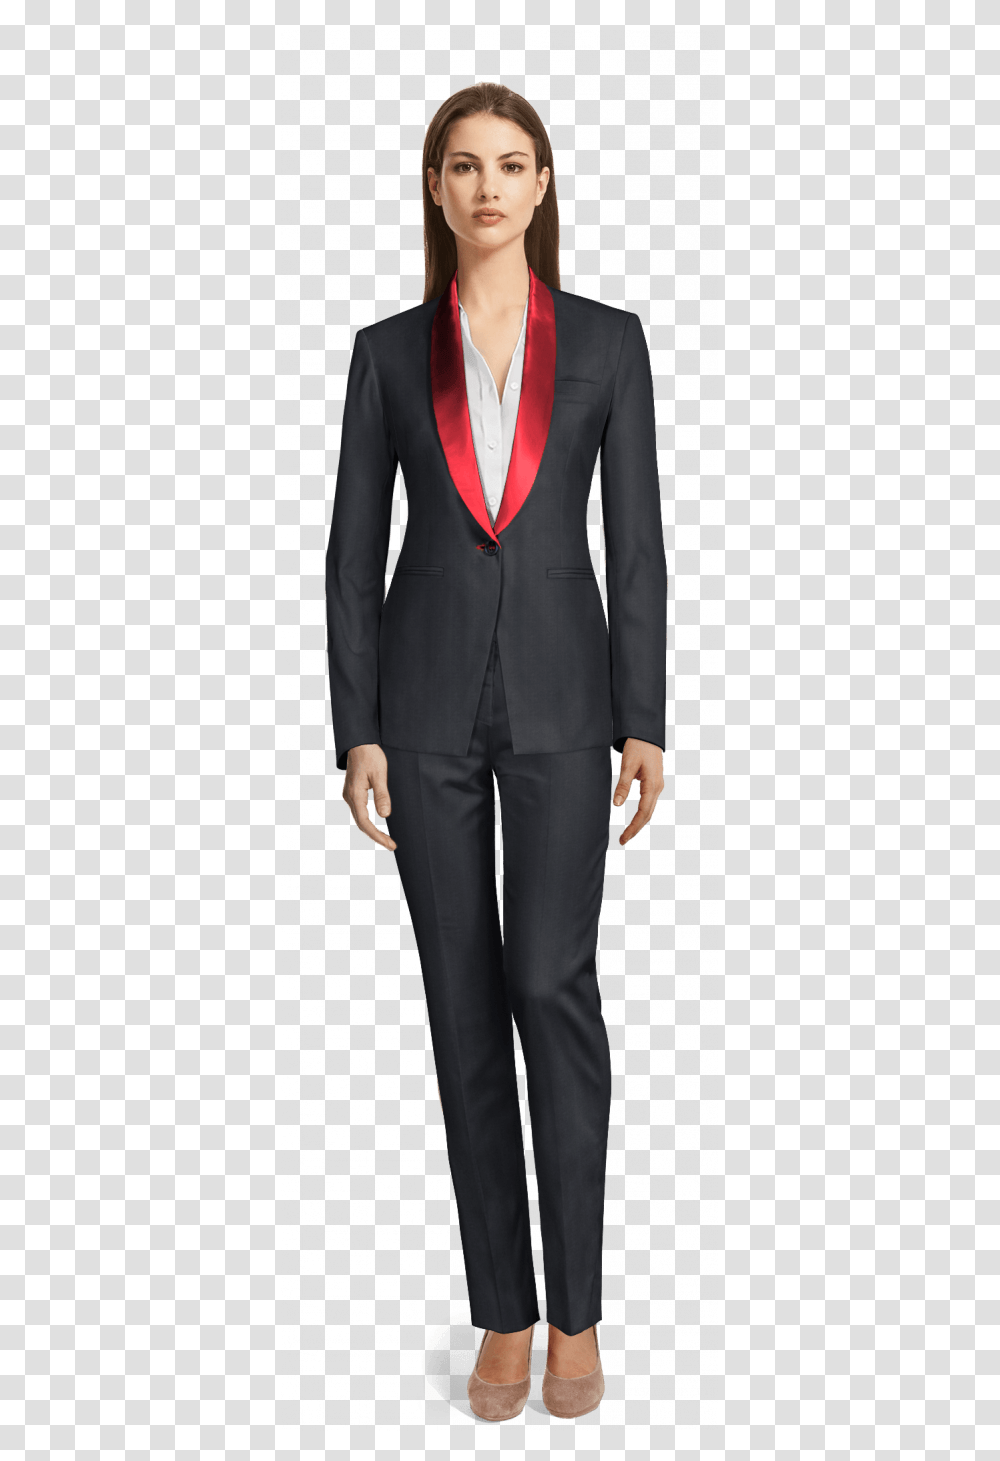 Navy Blue Shiny Tuxedo With Shawl Lapels Whole Body Formal Attire For Women, Suit, Overcoat, Apparel Transparent Png